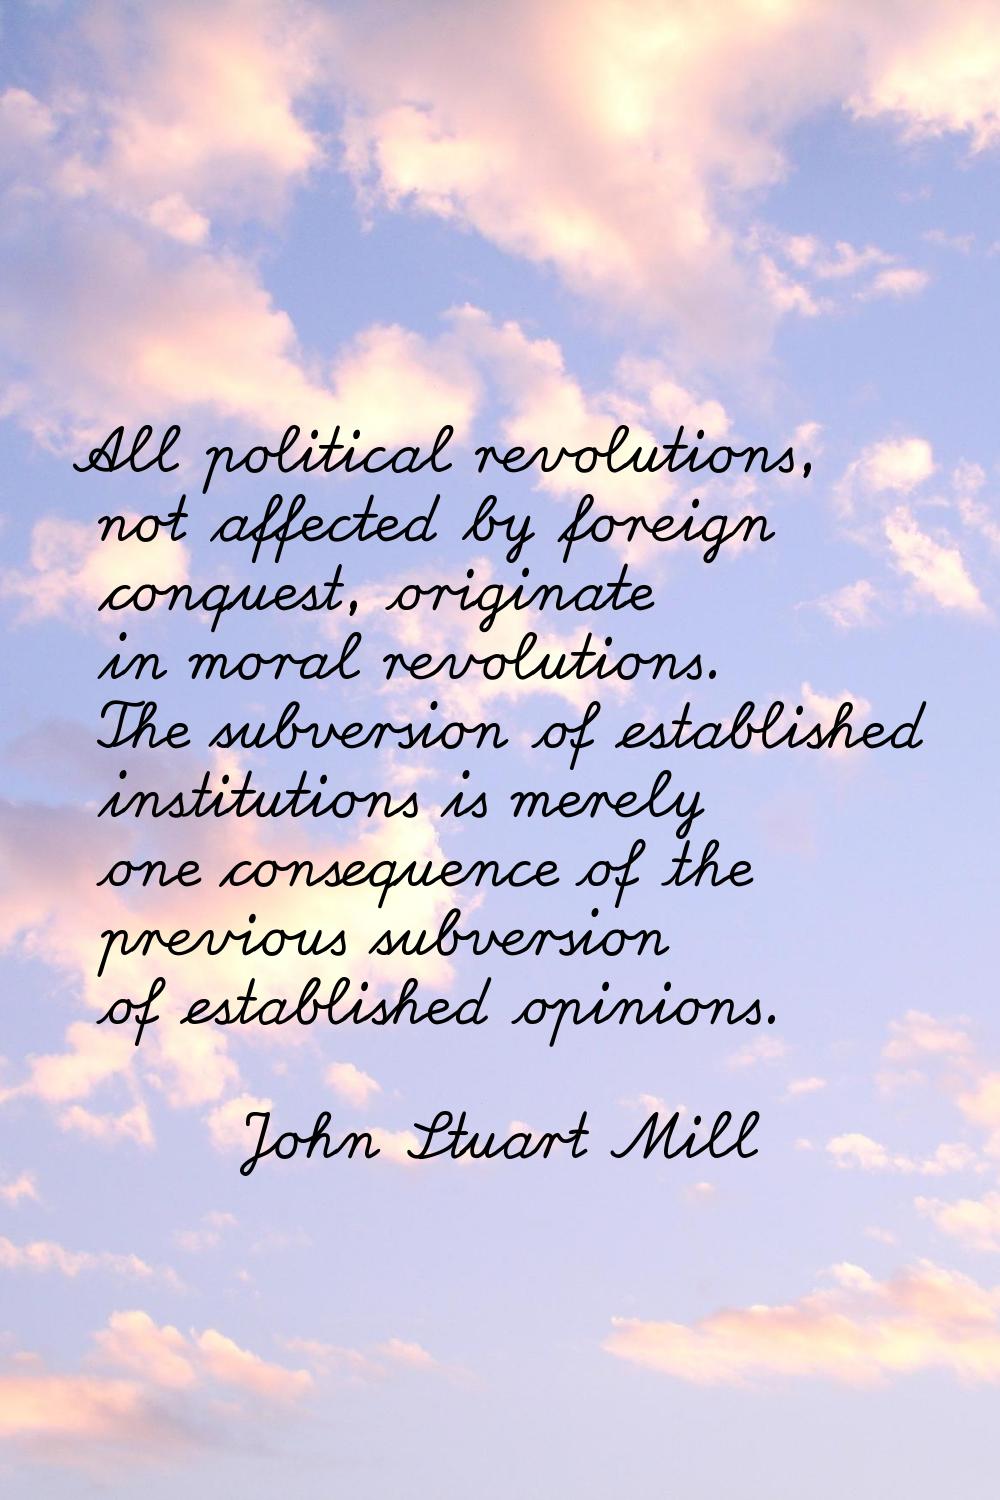 All political revolutions, not affected by foreign conquest, originate in moral revolutions. The su